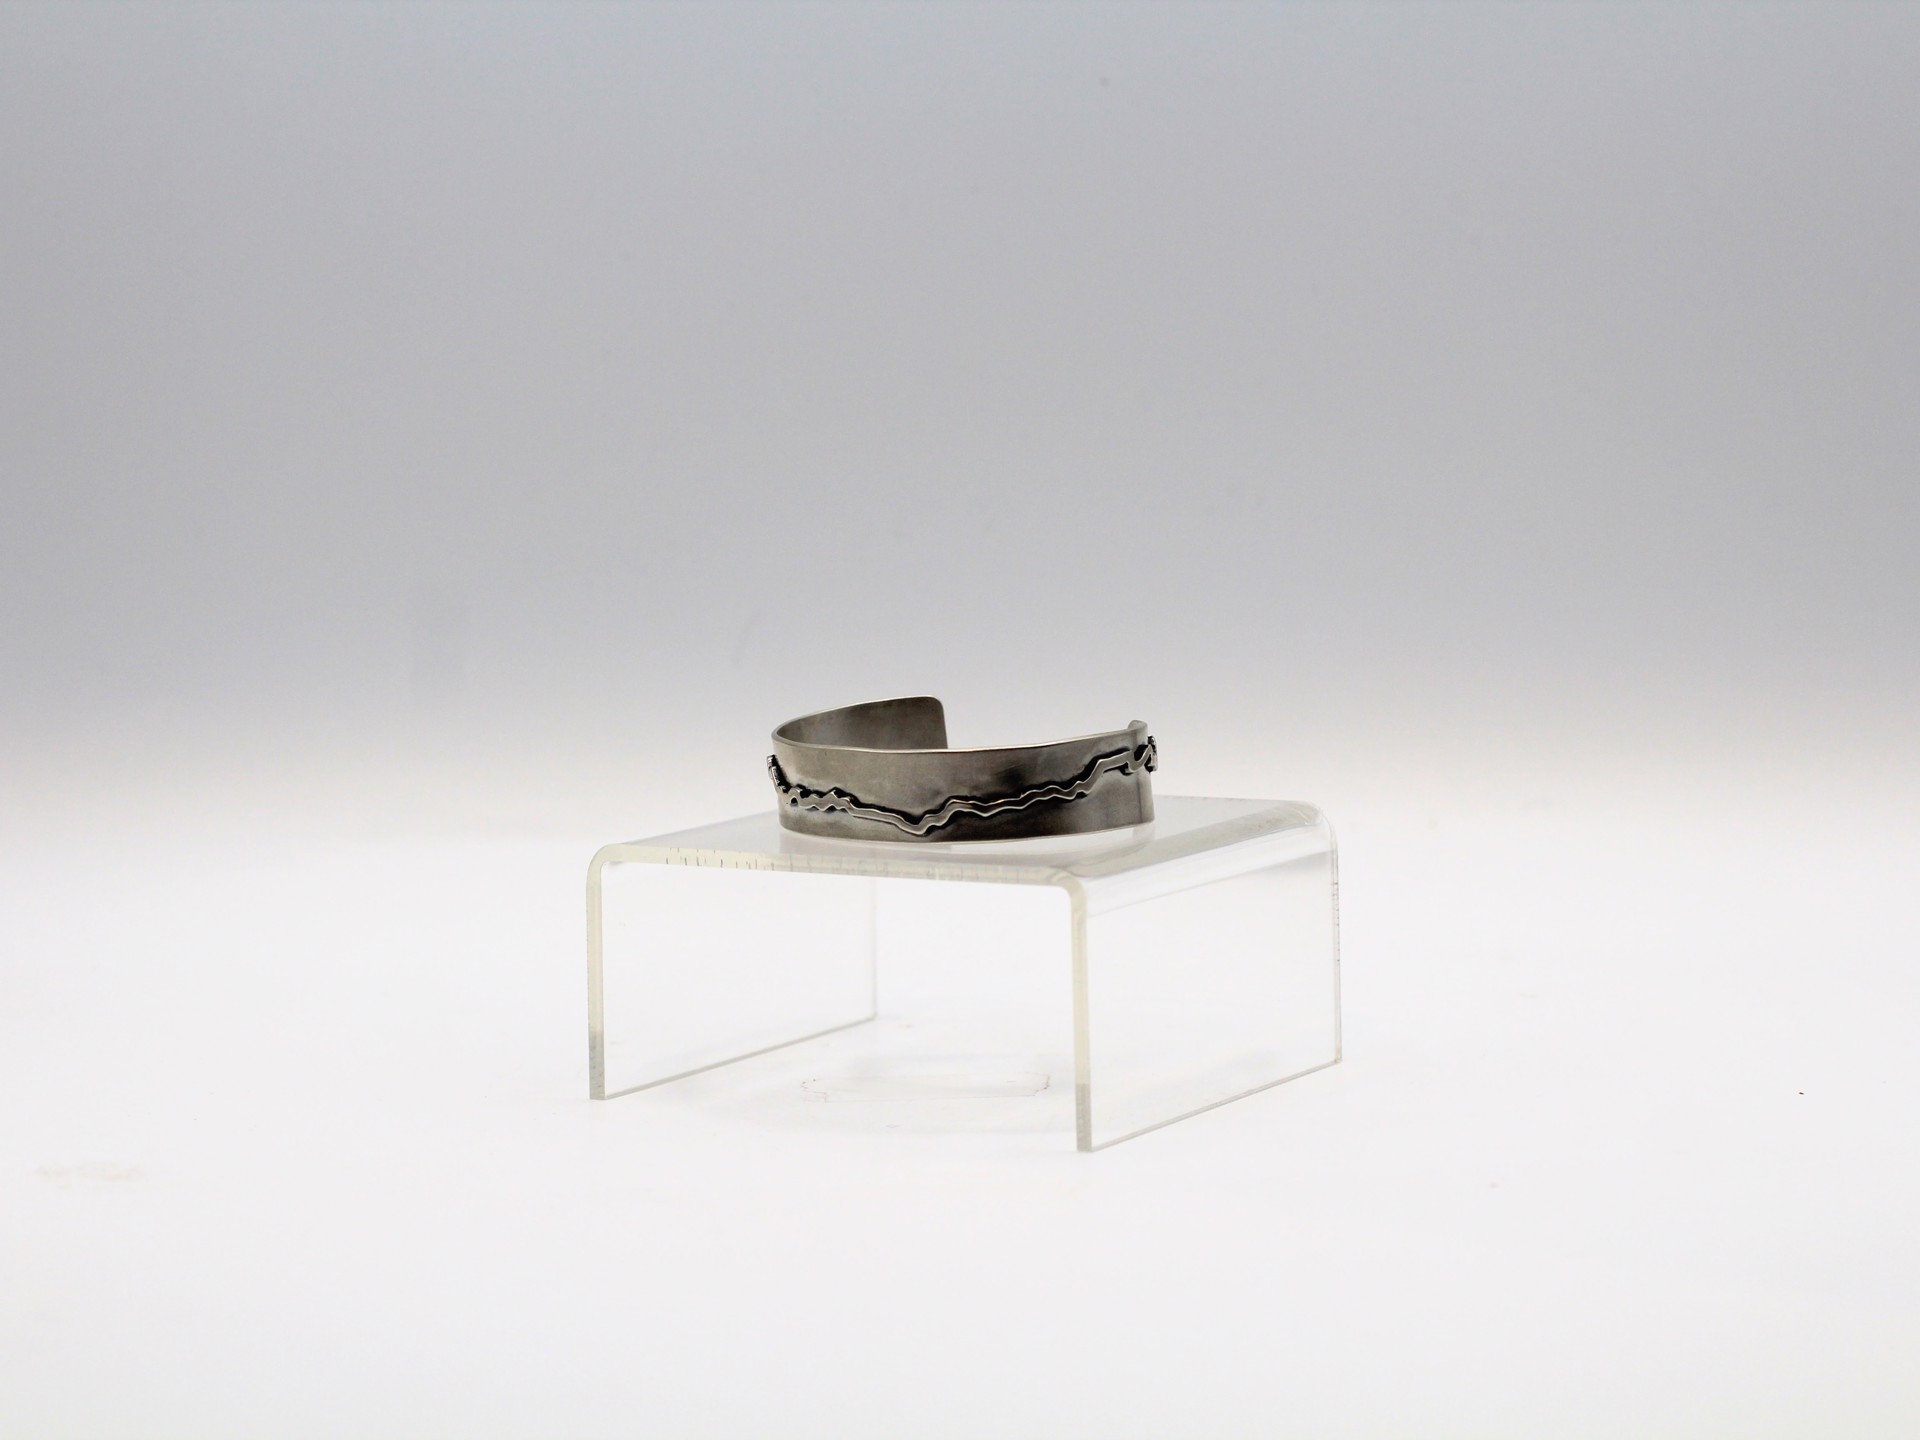 Bitterroot Outline Cuff (Sterling Silver) by Emily Dubrawski